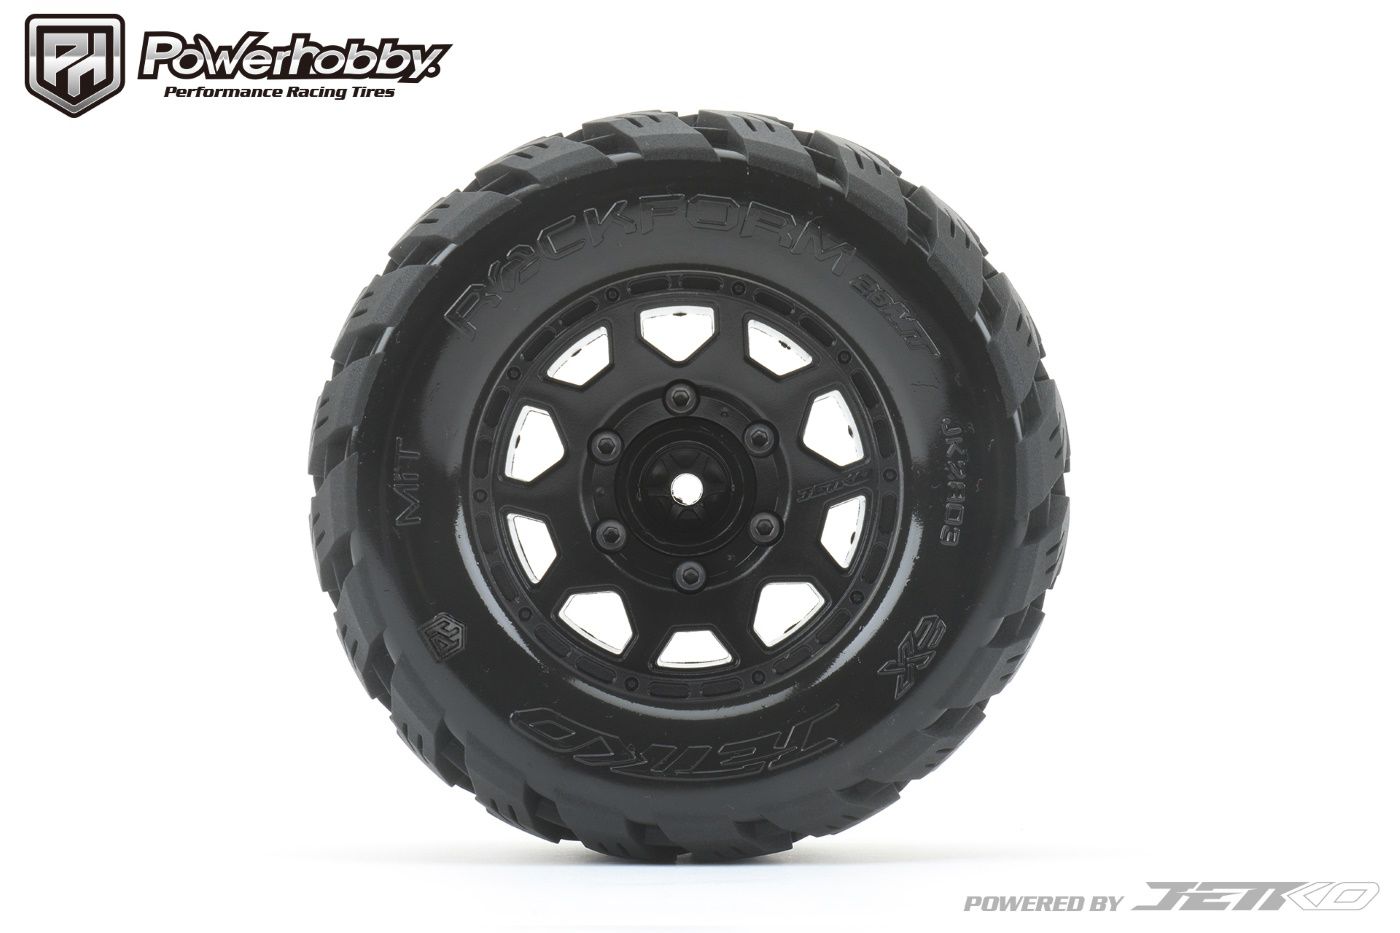 Powerhobby 1/10 2.8 MT Rockform Belted Tires (2) with Removable Hex Wheels - PowerHobby